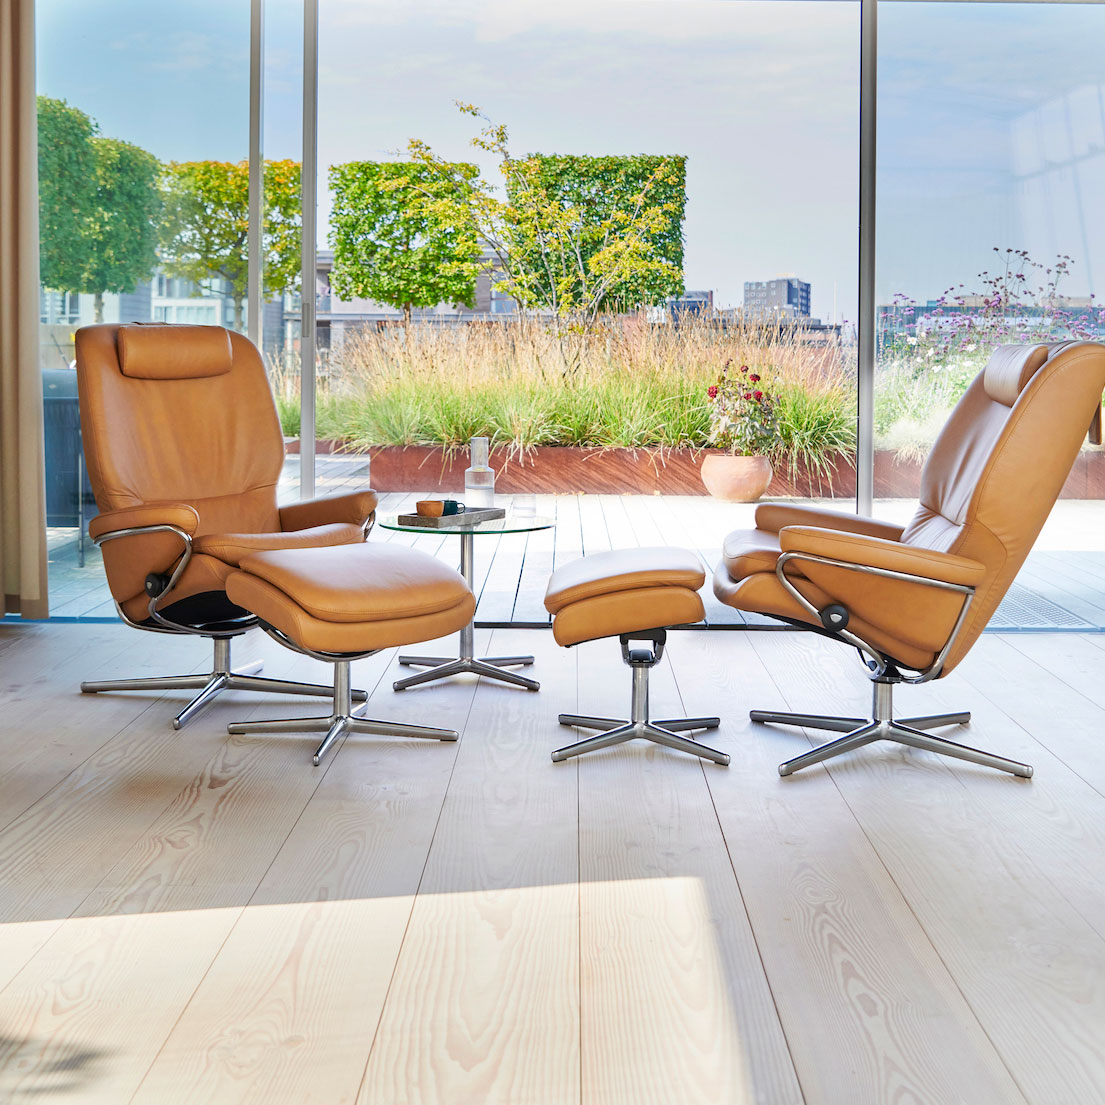 Stressless Recliners: Comfort, Design, and Sustainability